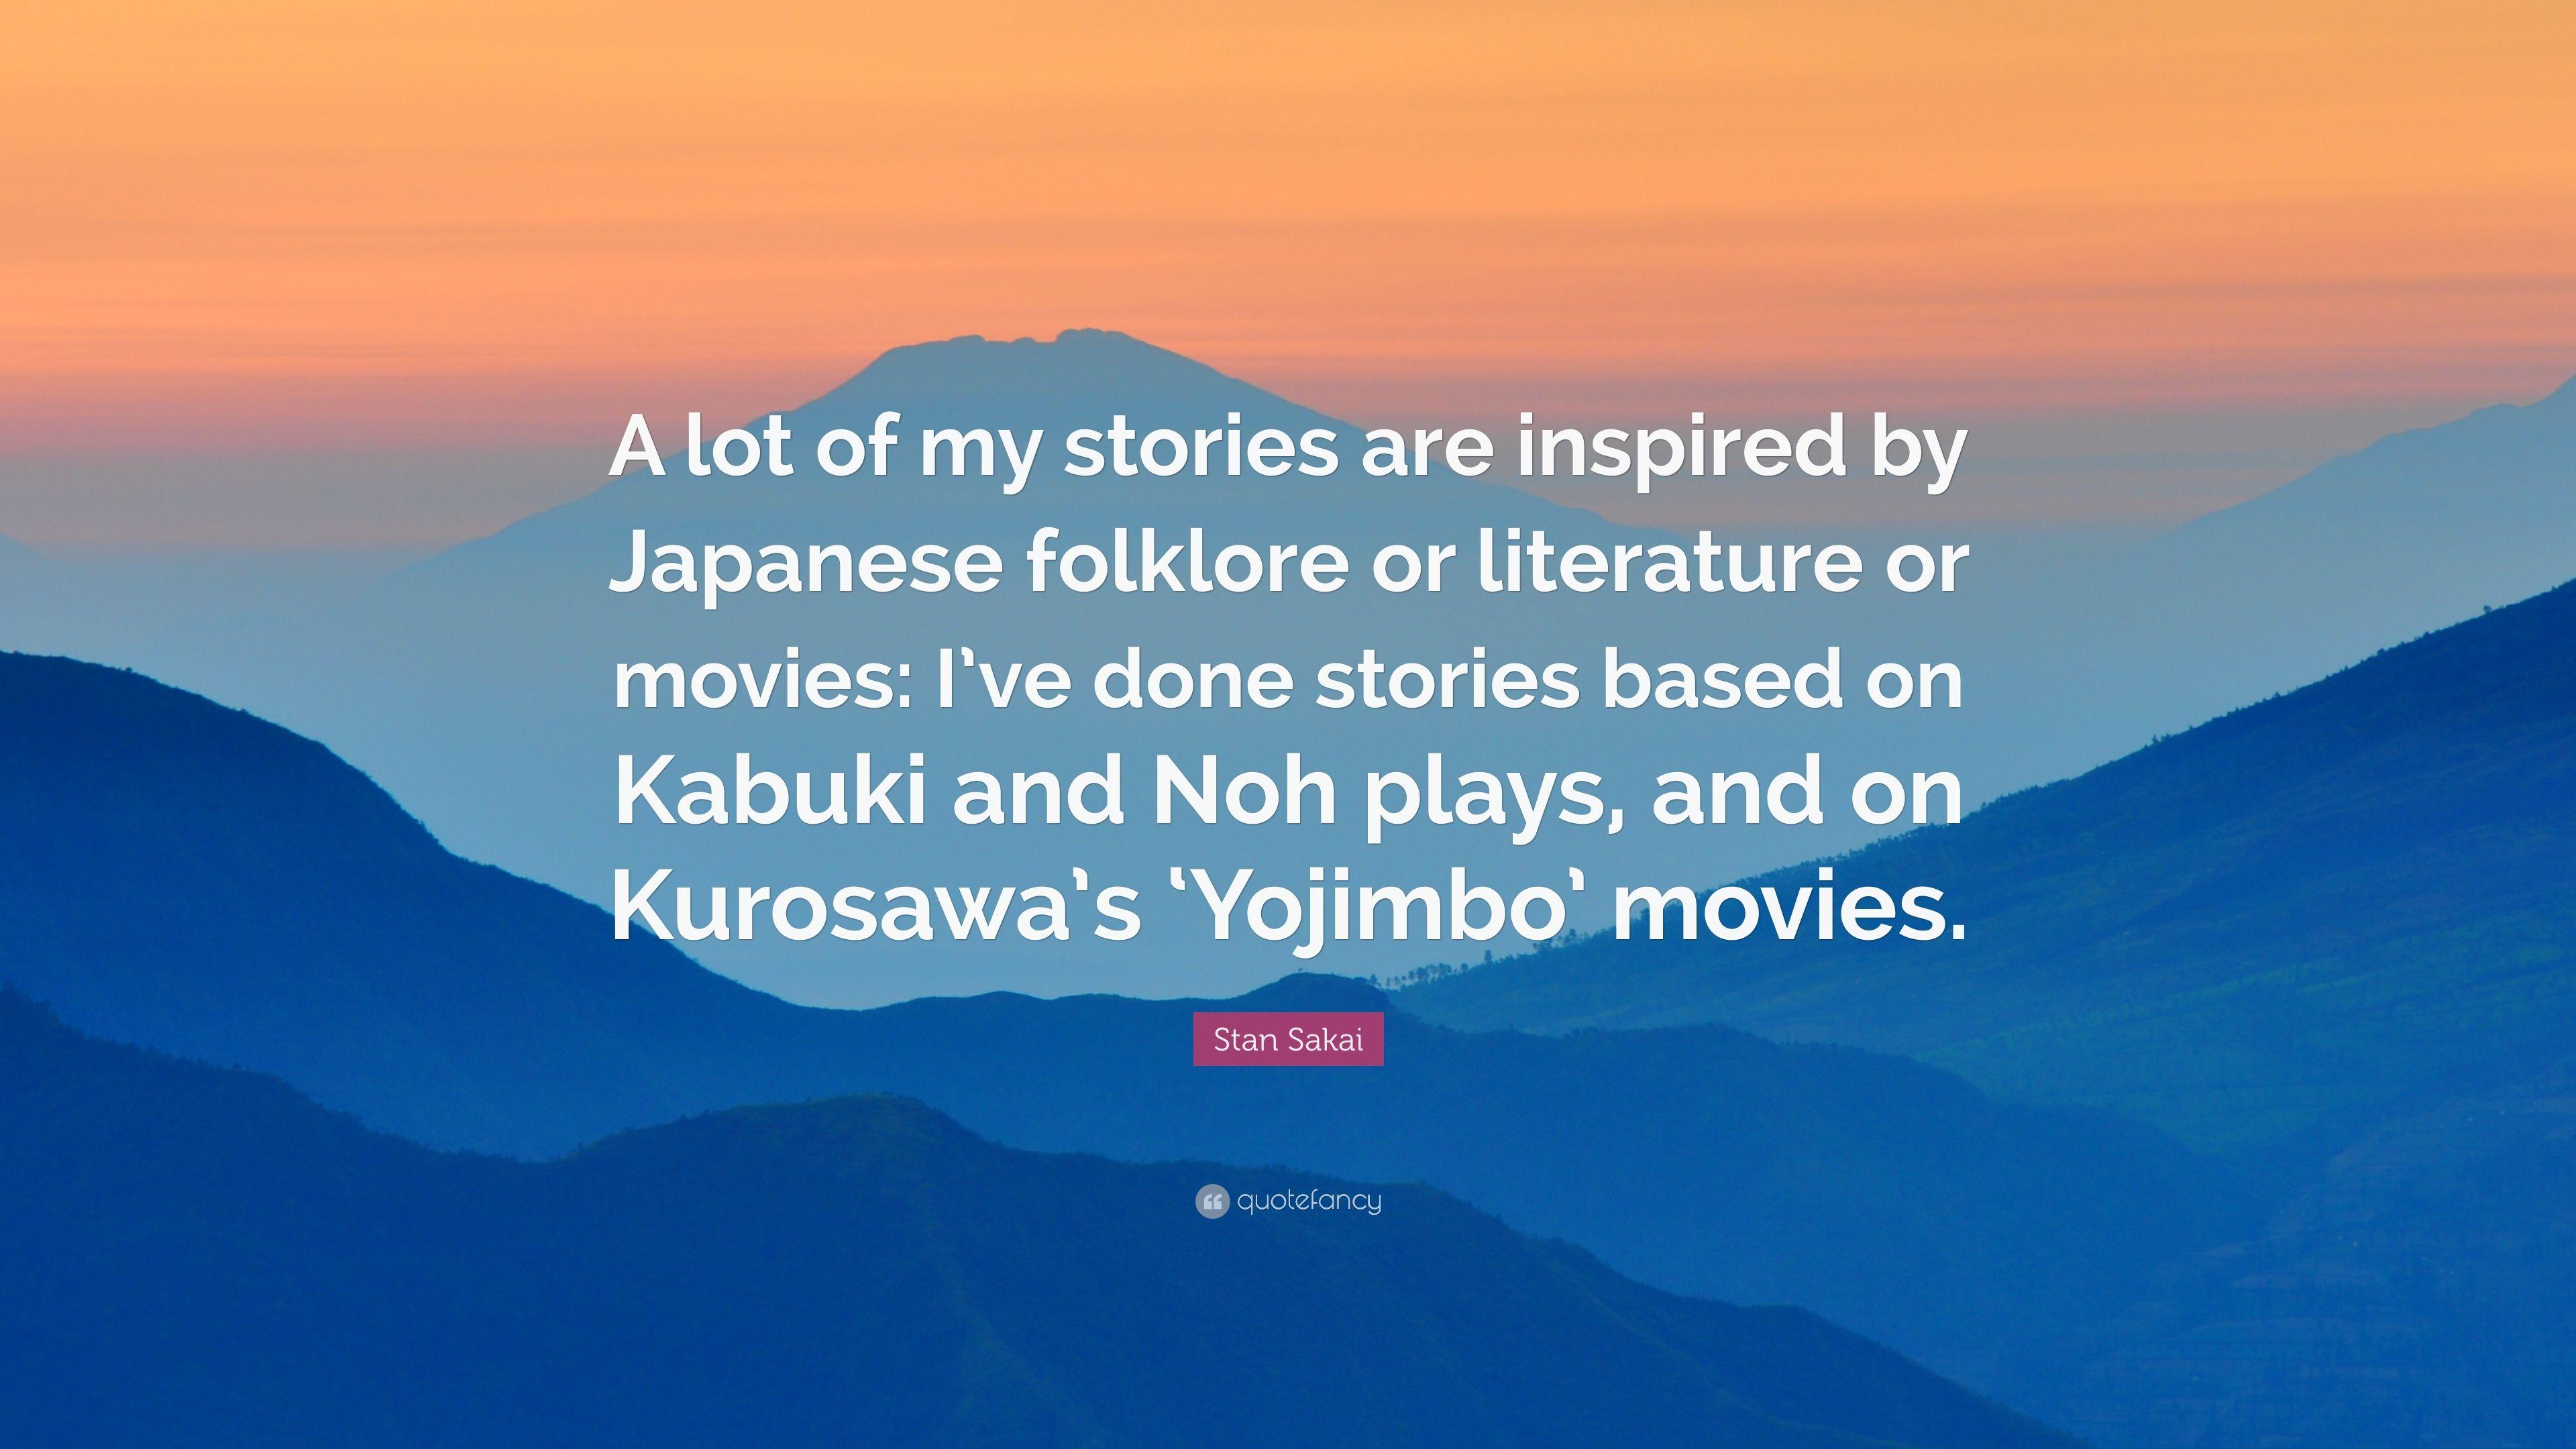 Stan Sakai Quote: “A lot of my stories are inspired